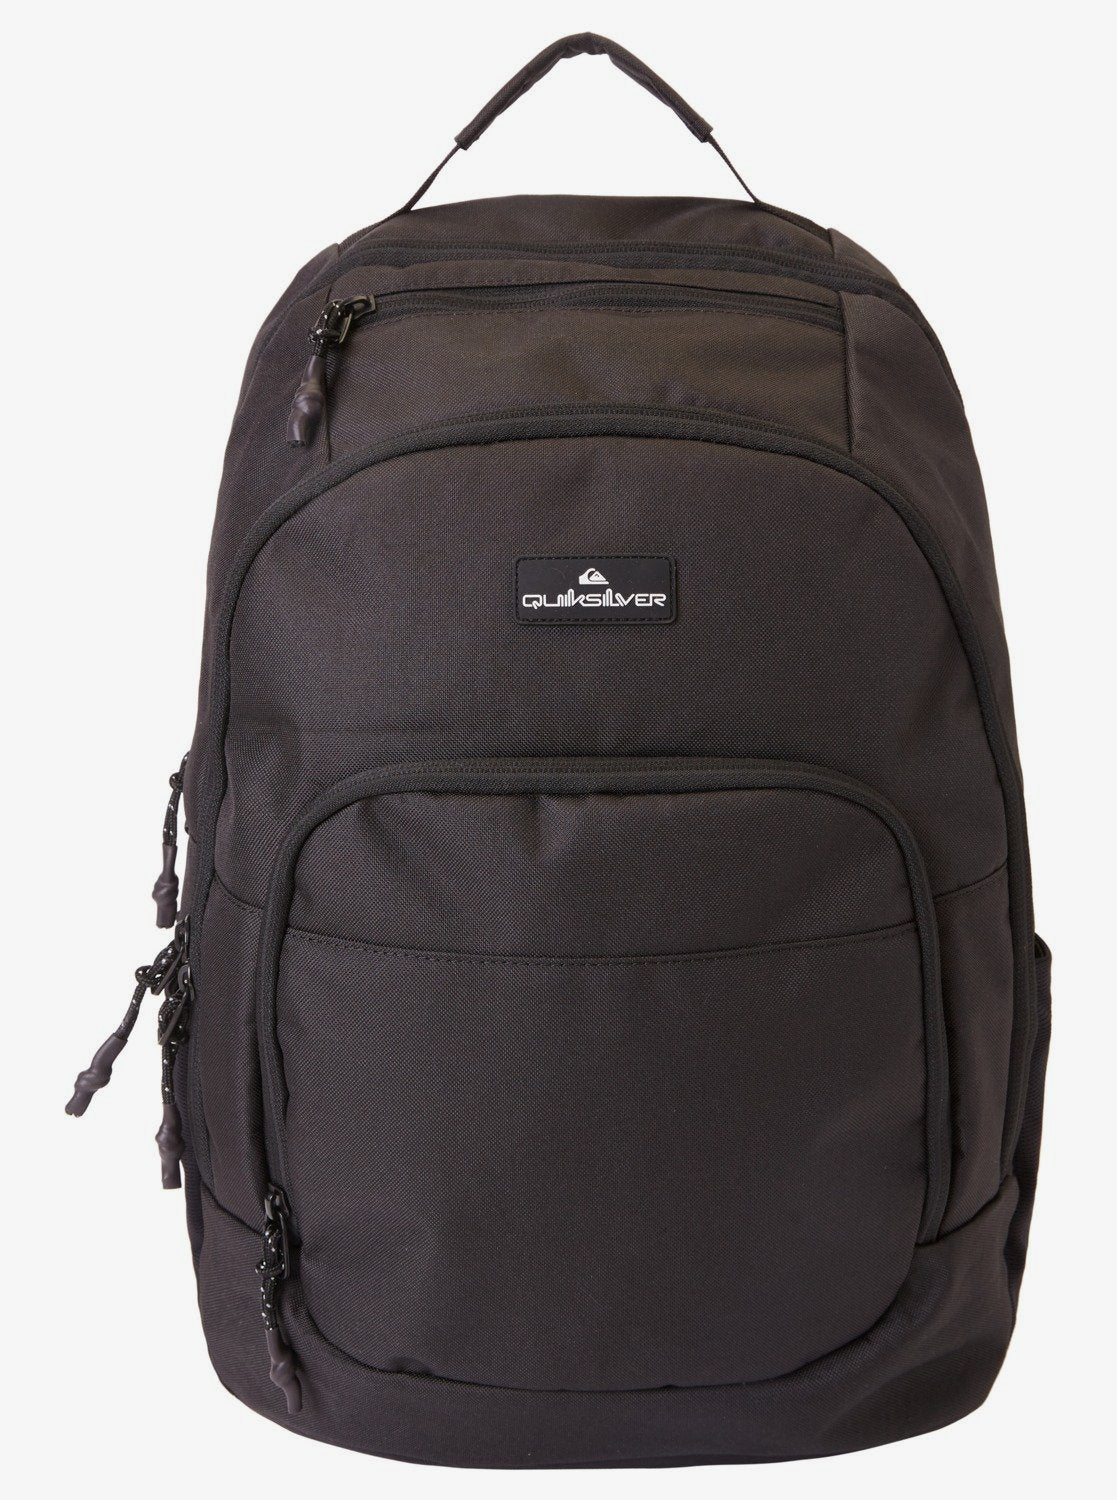 Quiksilver Backpack 1969 Special - 28L Backpack